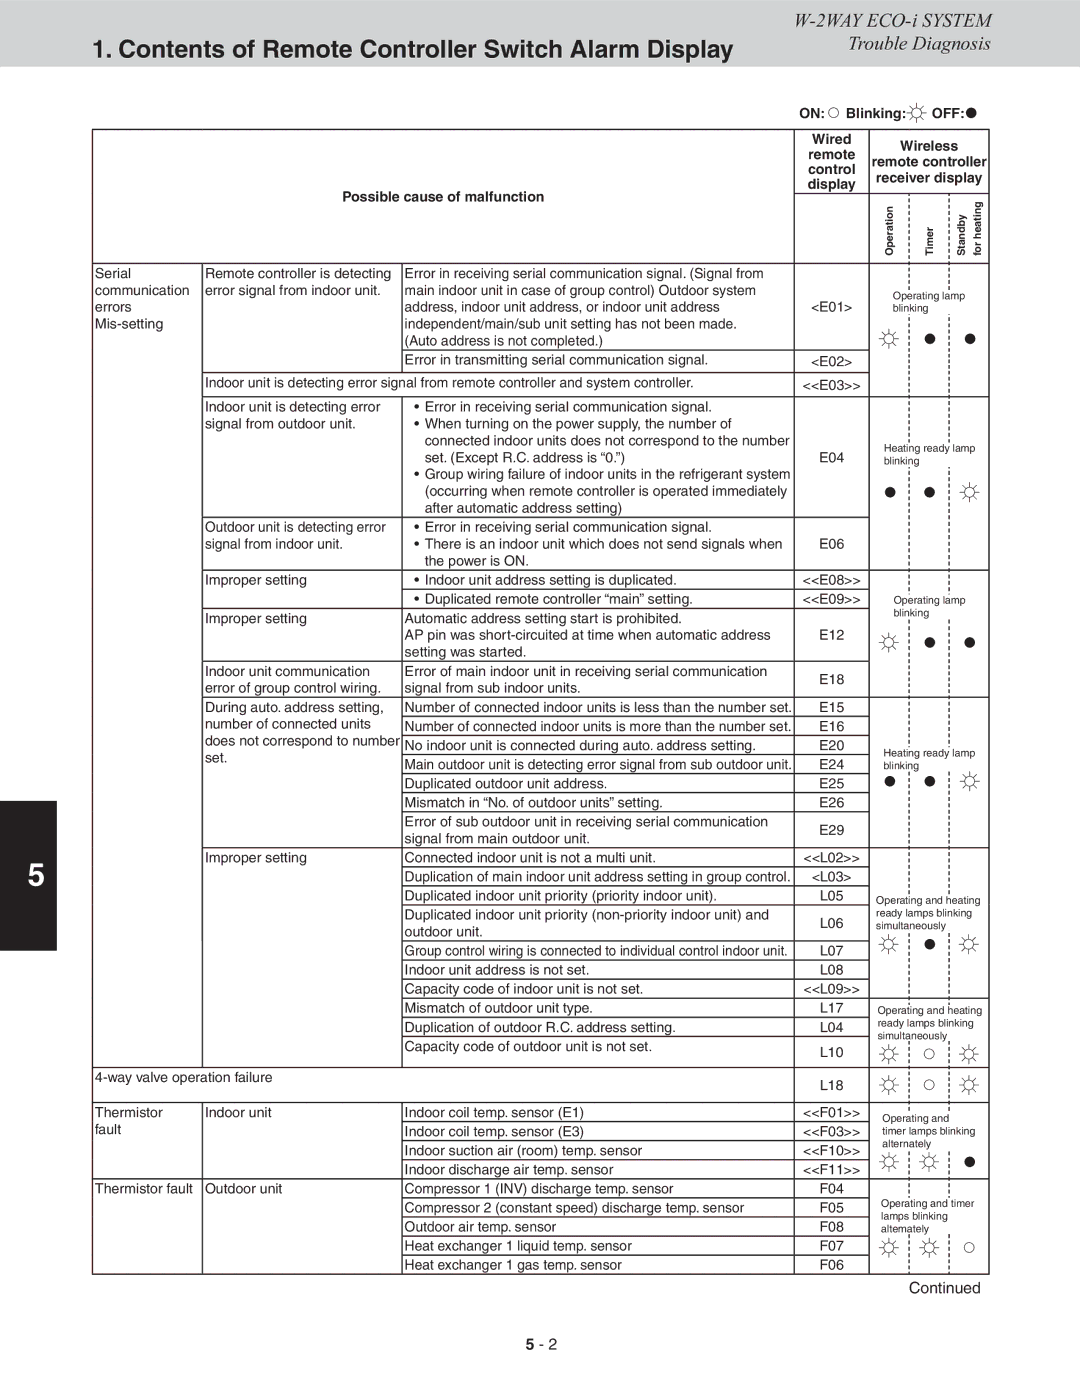 Sanyo CHDXR07263*, CHDXR09663, CHDX09663, CHDX07263 service manual Contents of Remote Controller Switch Alarm Display 